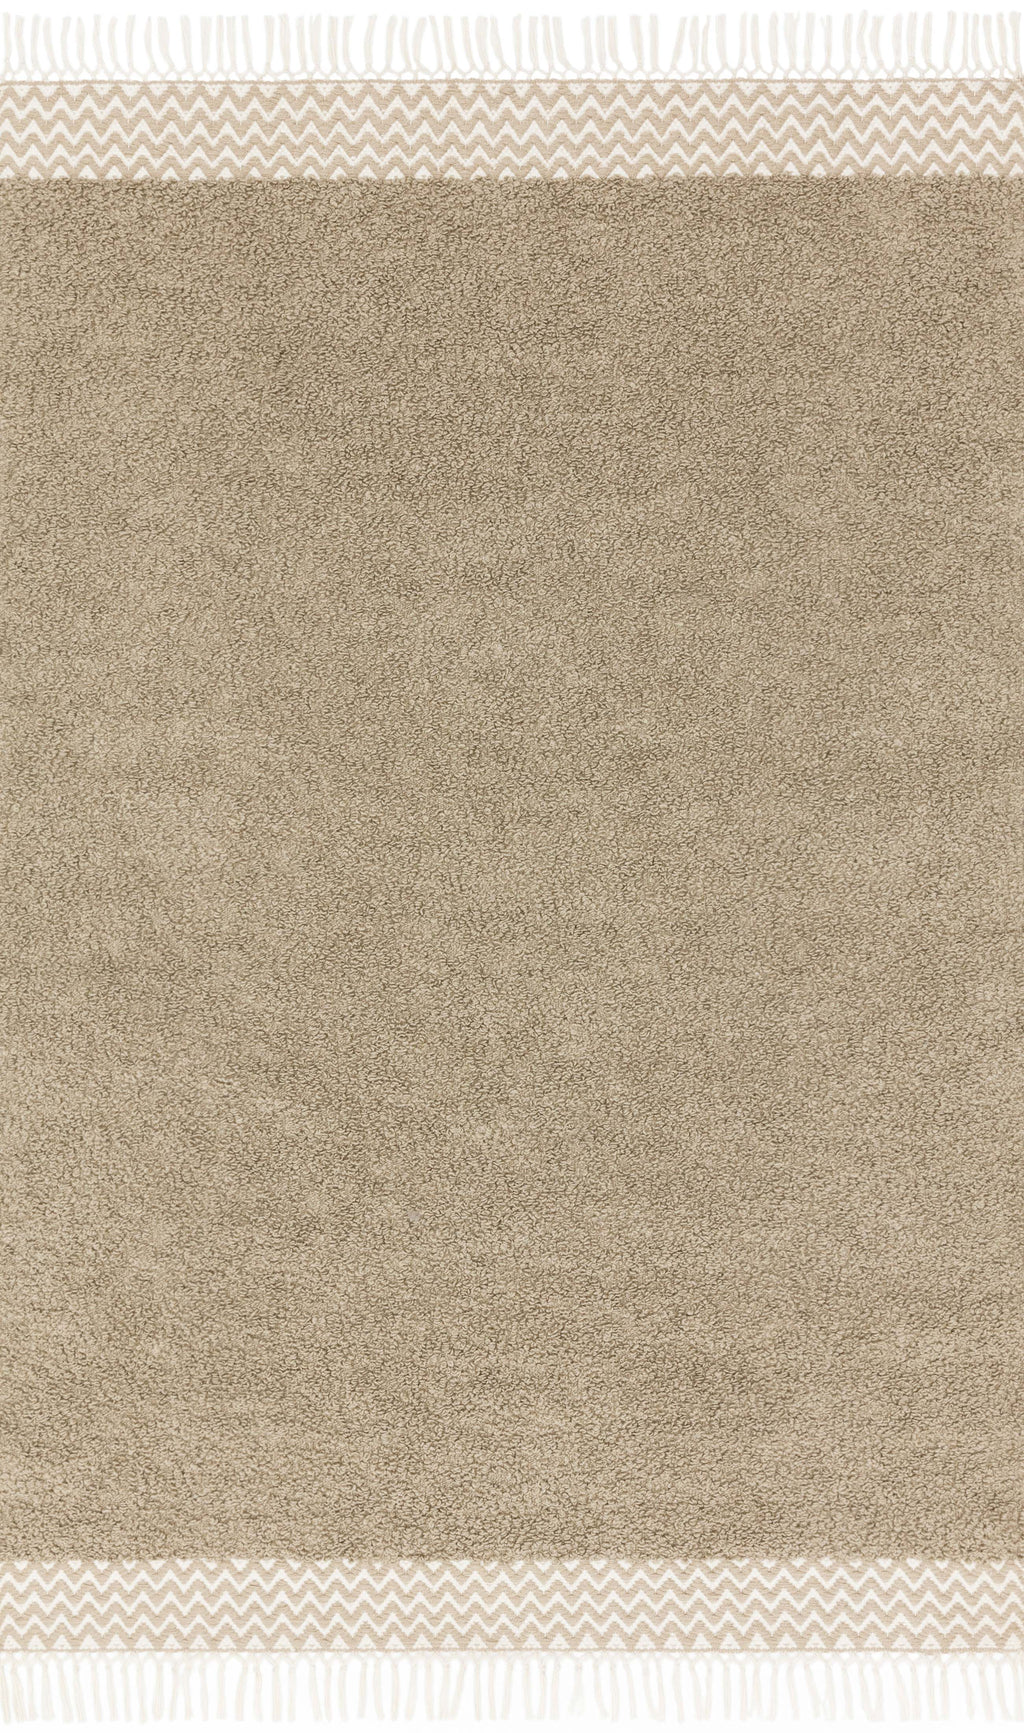 ARIES Collection Rug  in  OATMEAL Beige Accent Hand-Woven Polyester